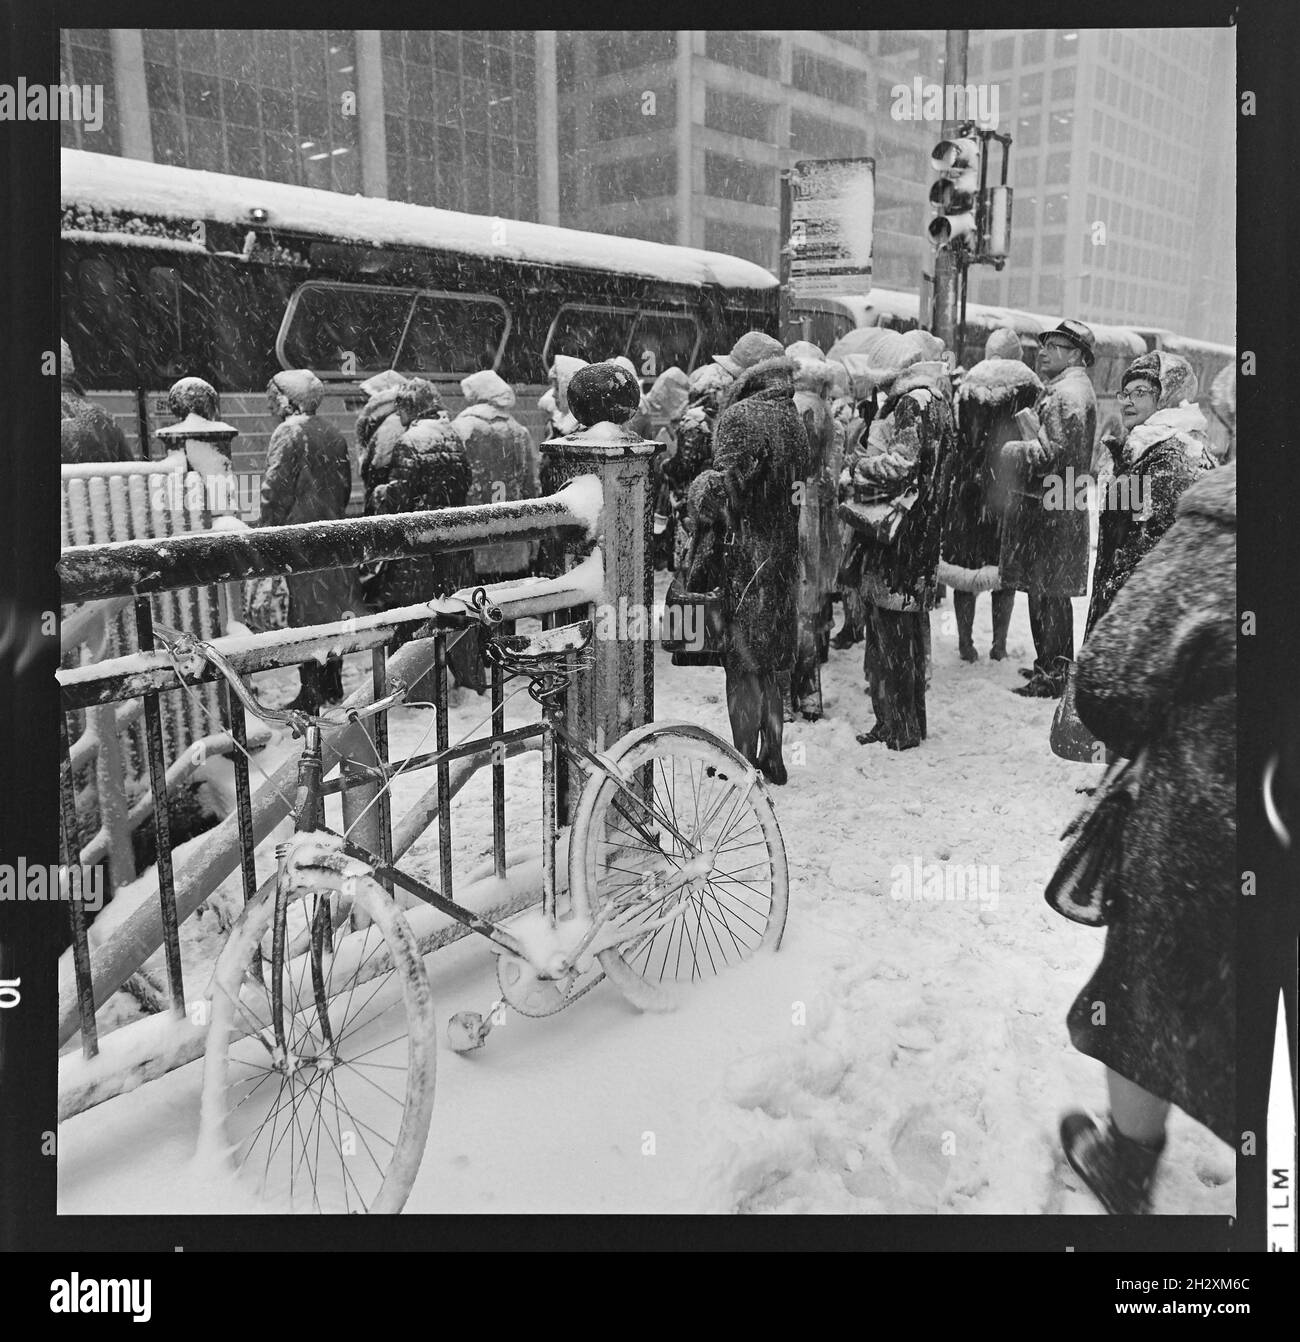 Commuters in snow storm on Michigan Avenue, Chicago, IL 1974. Stock Photo